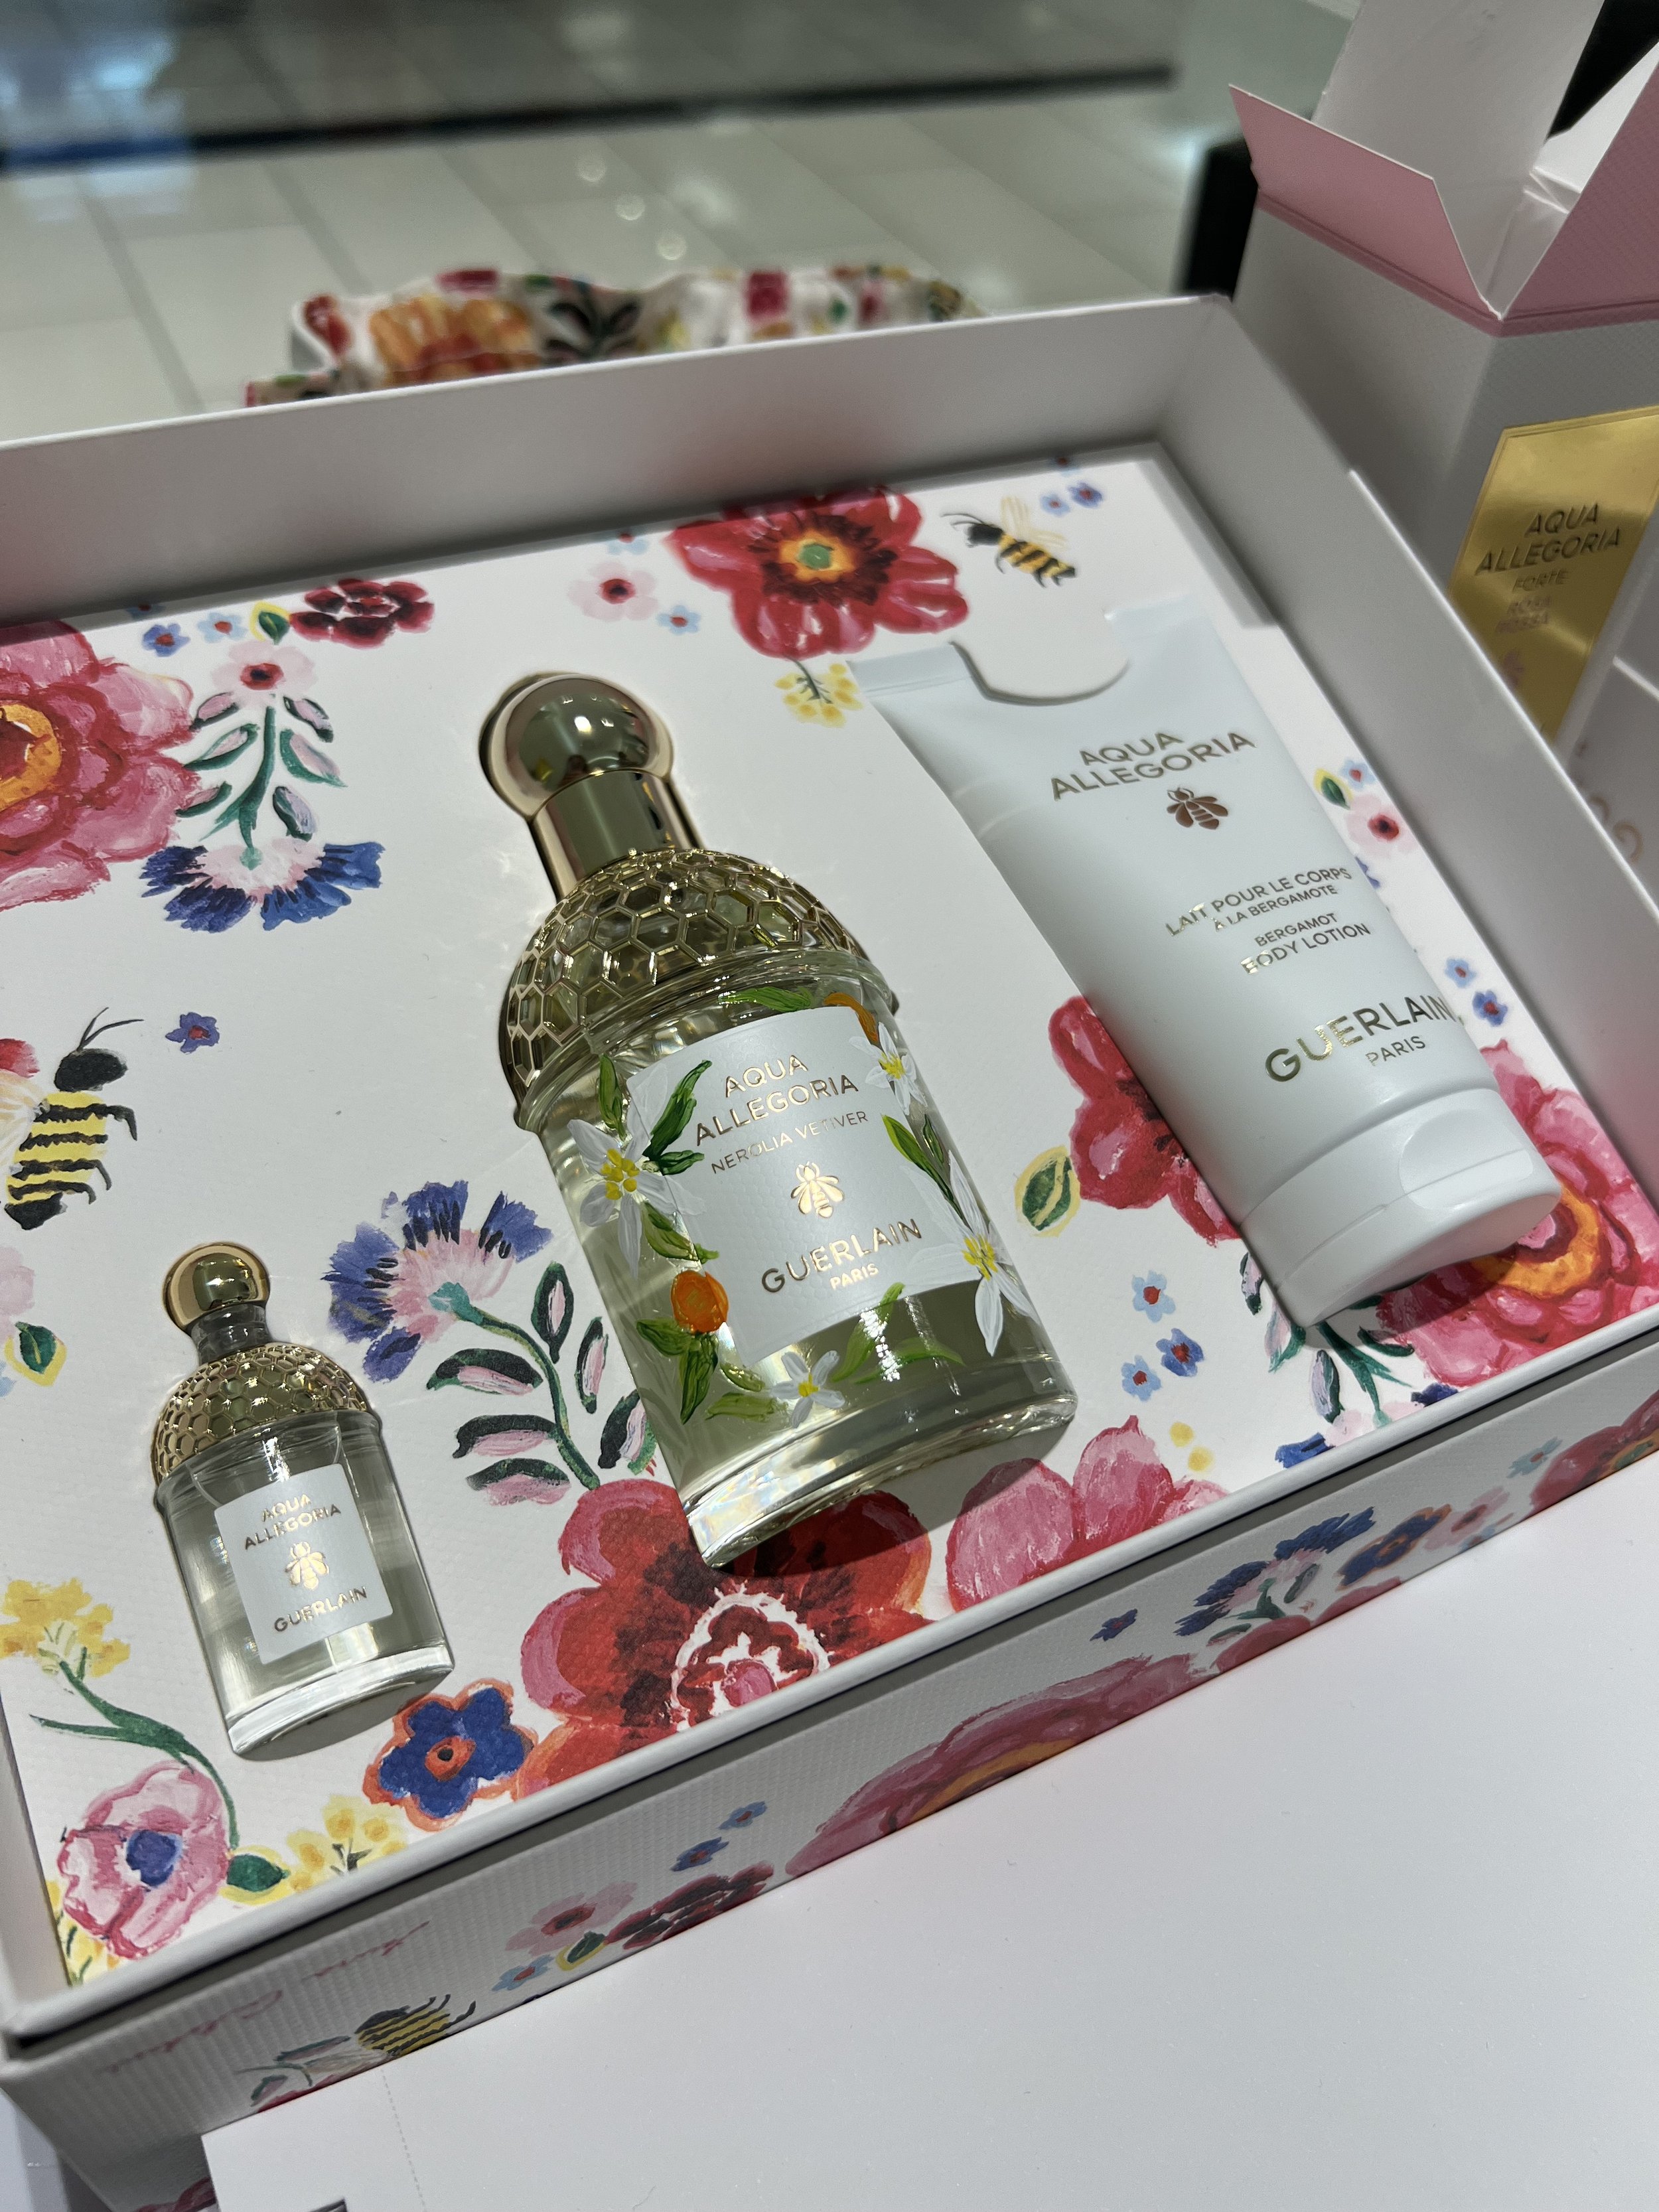 guerlain-fragrance-gift-set-with-hand-painted-personalized-florals-by-jodi-tellier.jpeg